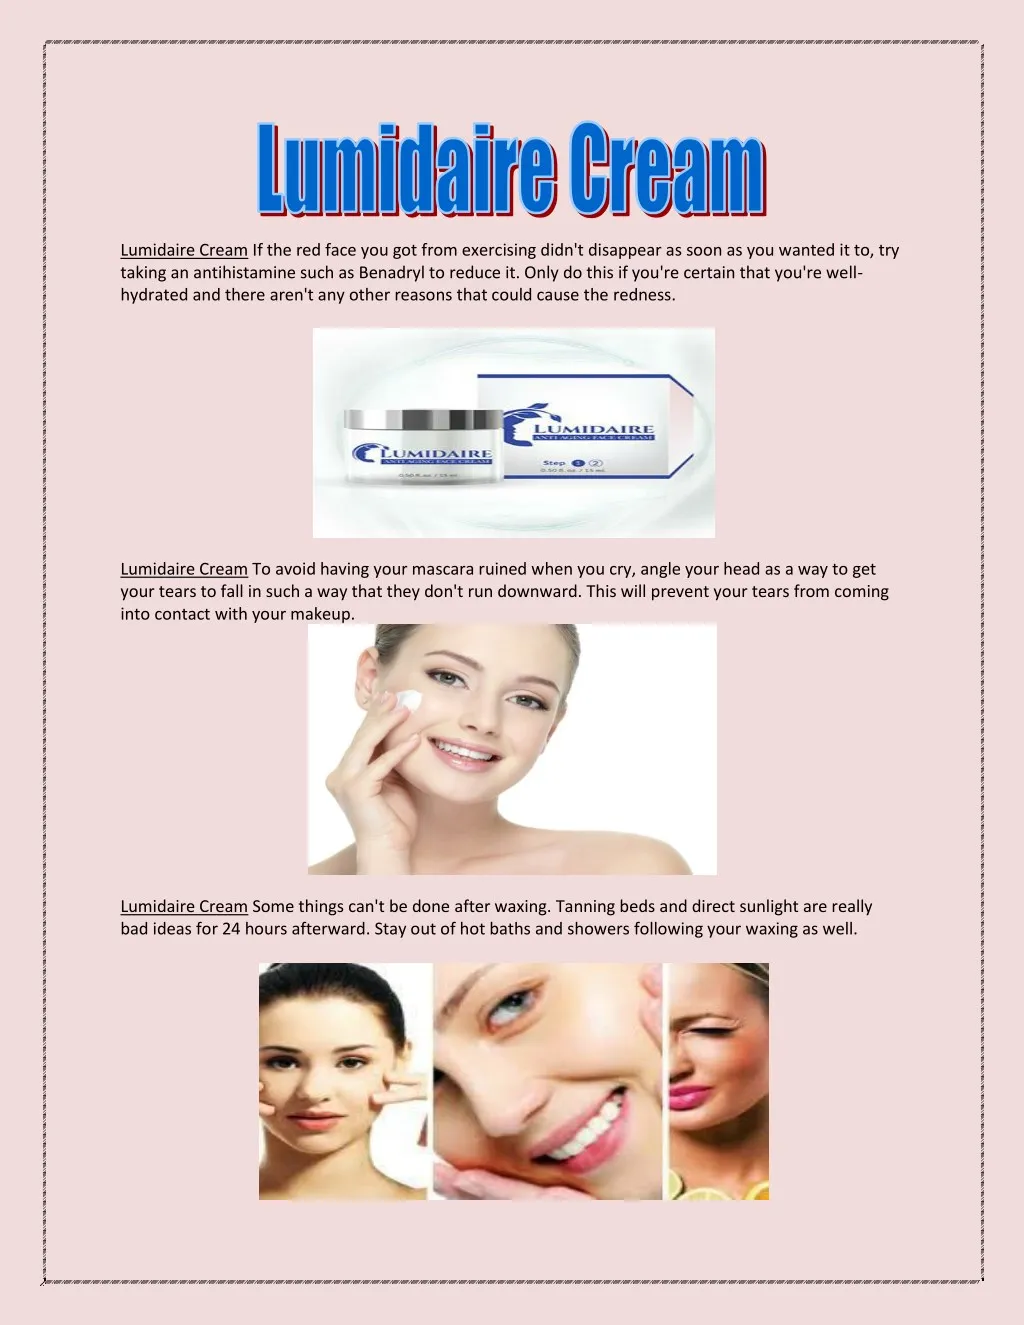 lumidaire cream if the red face you got from